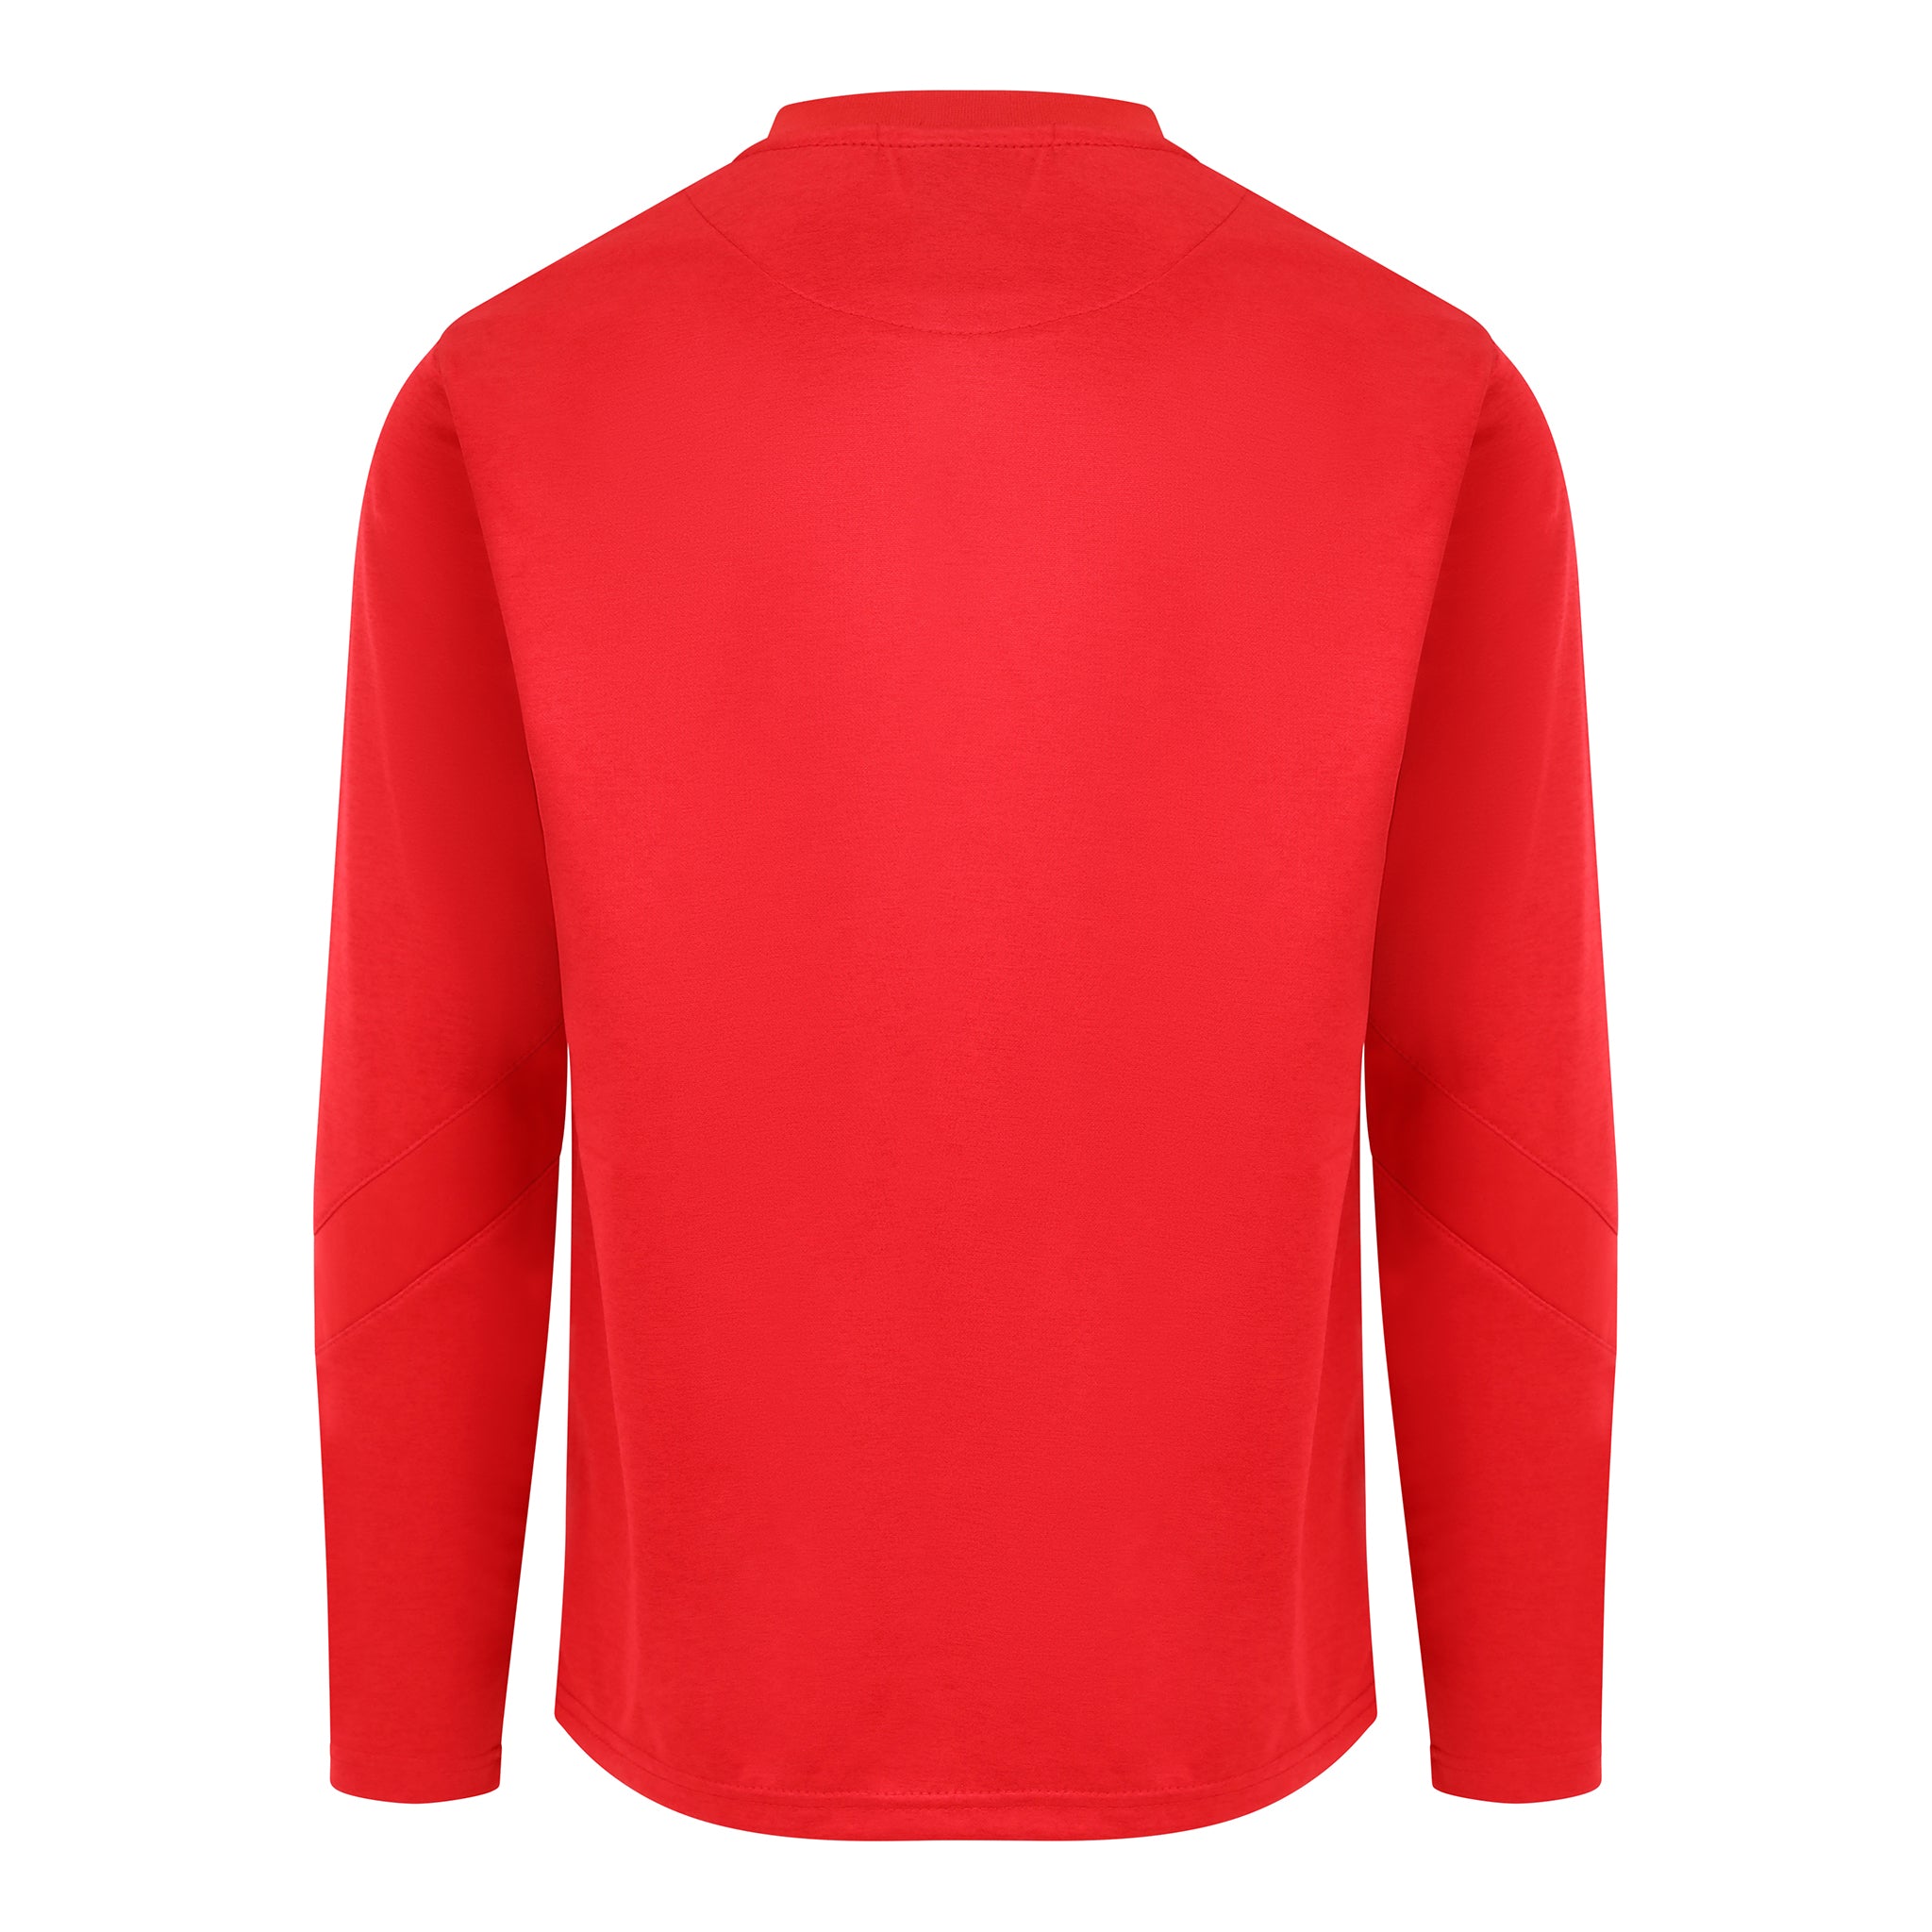 Mc Keever Core 22 Sweat Top - Youth - Red